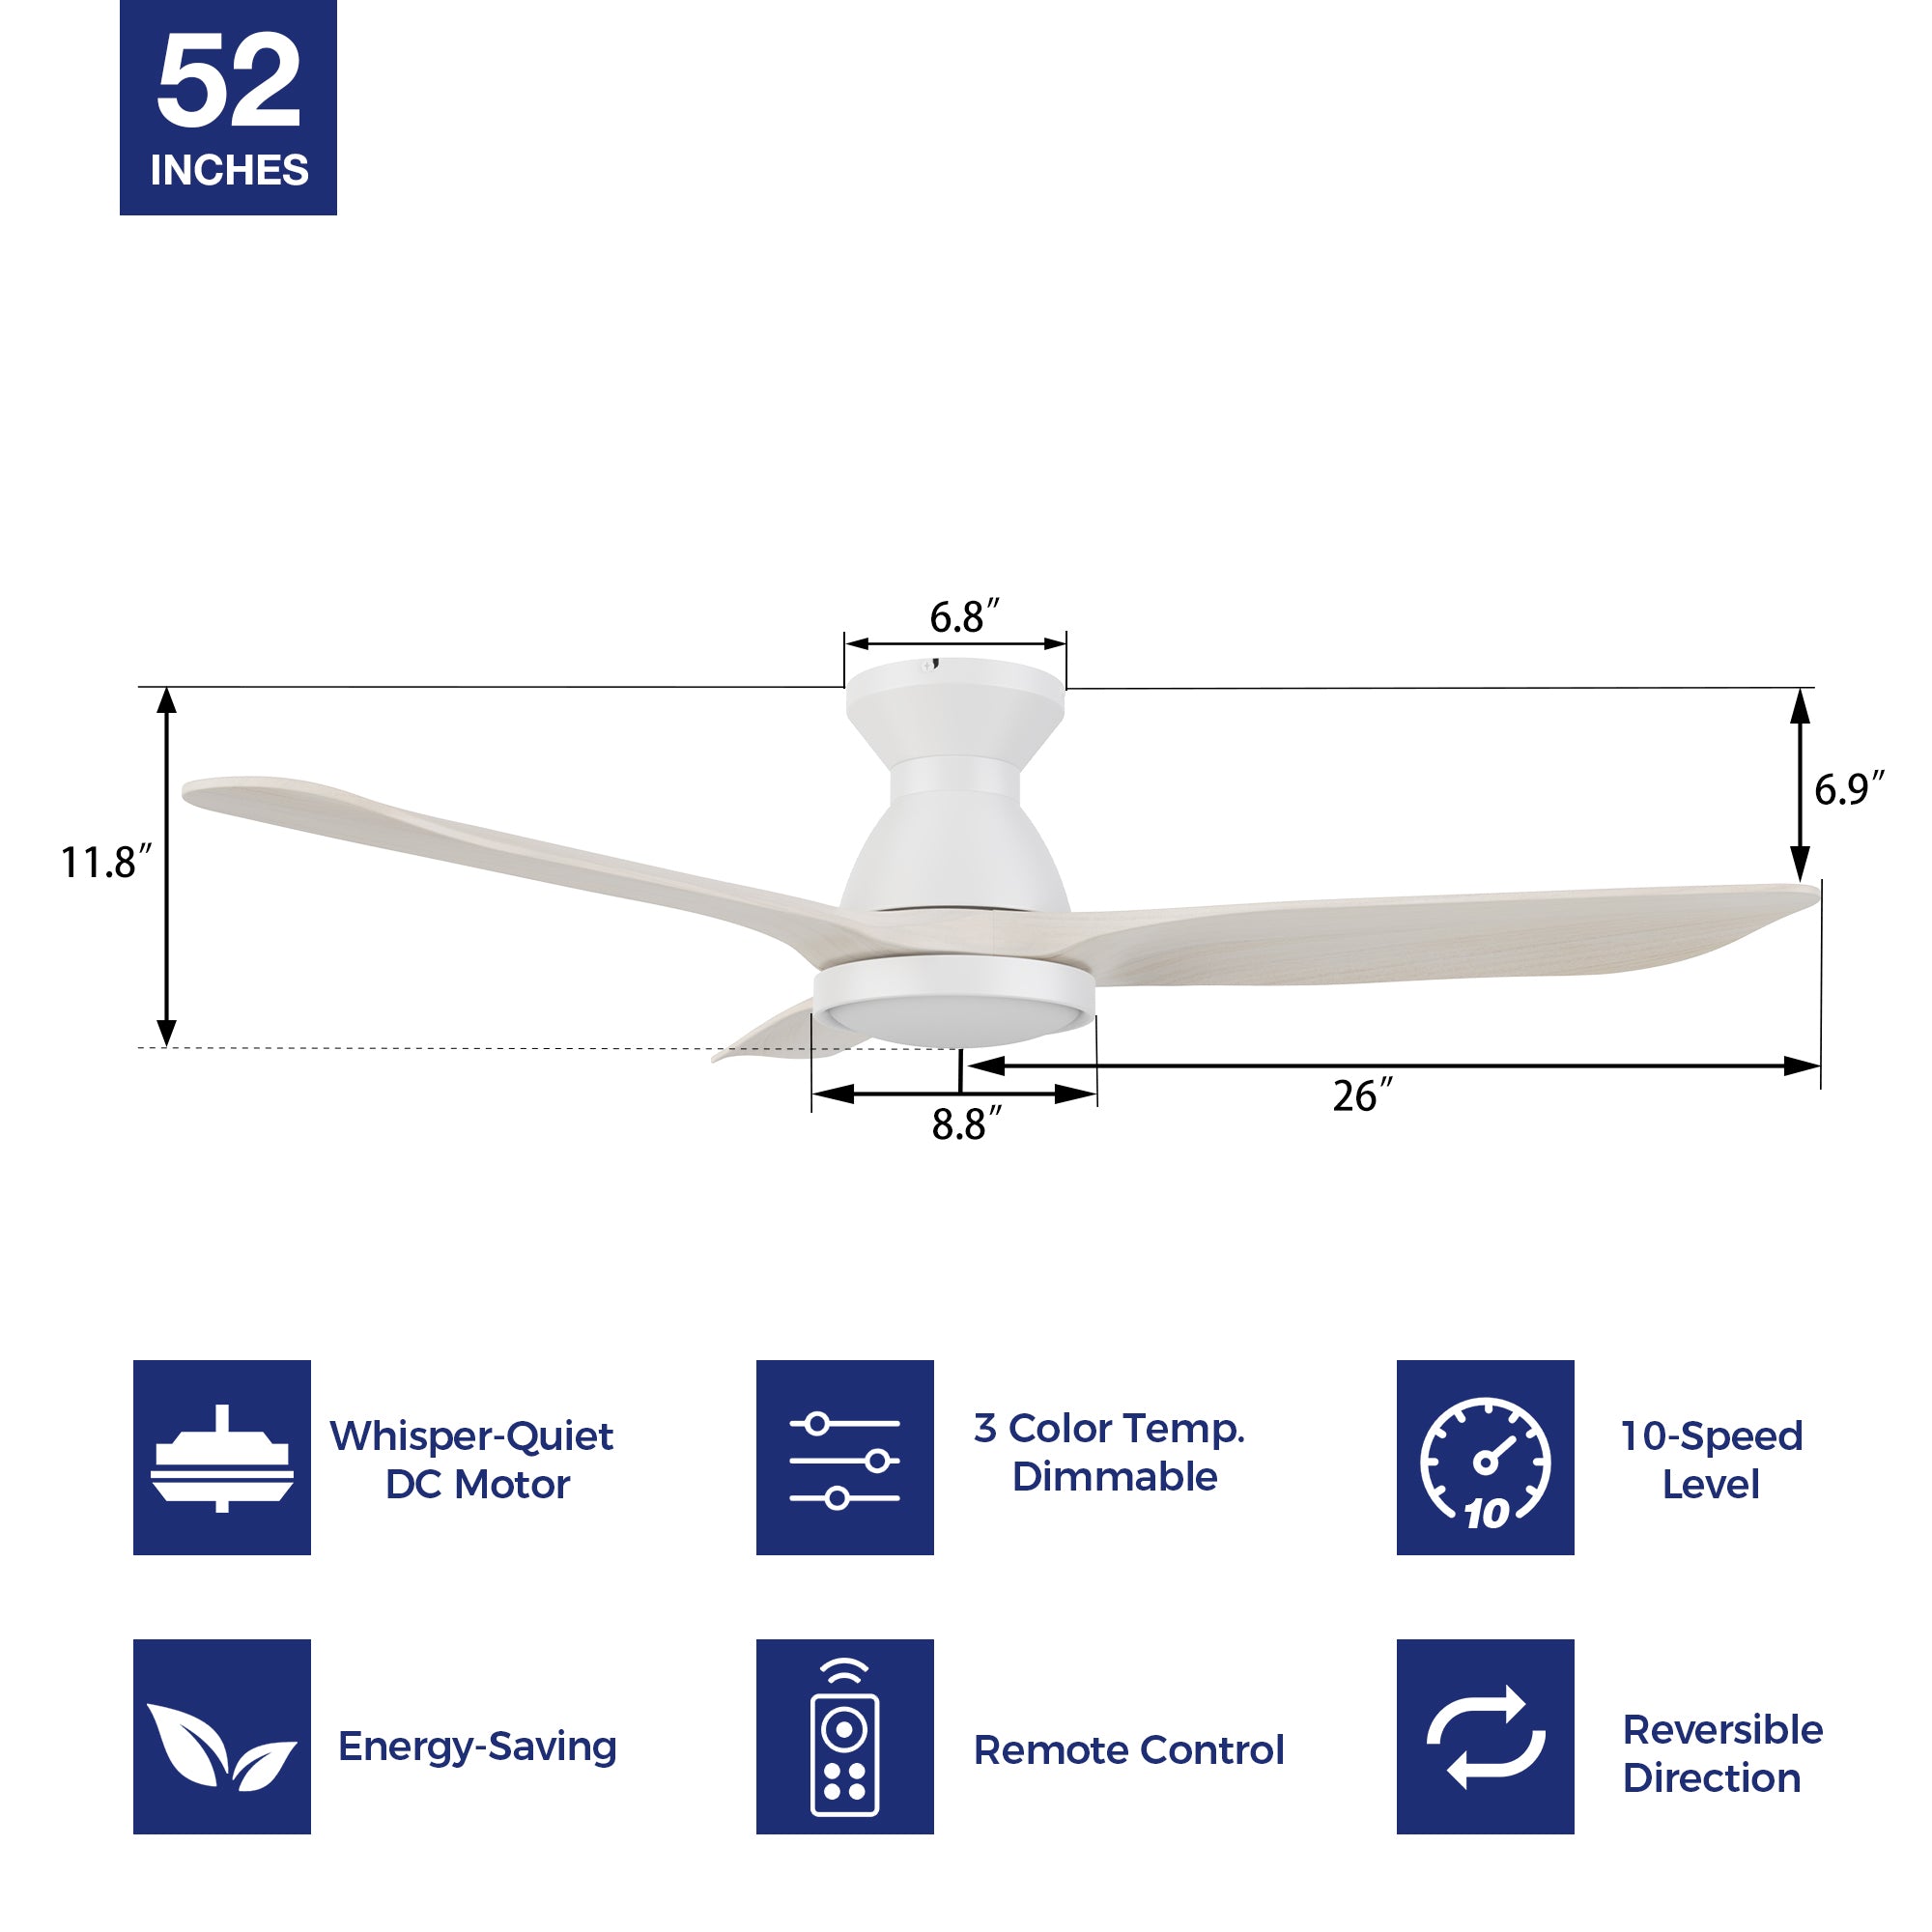 Transform your space with a 52-inch white flush-mounted ceiling fan. Enjoy the convenience of a remote-controlled 10-speed adjustable DC motor, 3-color temperature dimmable light with 1300 lumens, and an impressive 4900 CFM high air volume. Indulge in whisper-quiet cooling thanks to the energy-efficient DC motor. The fan&